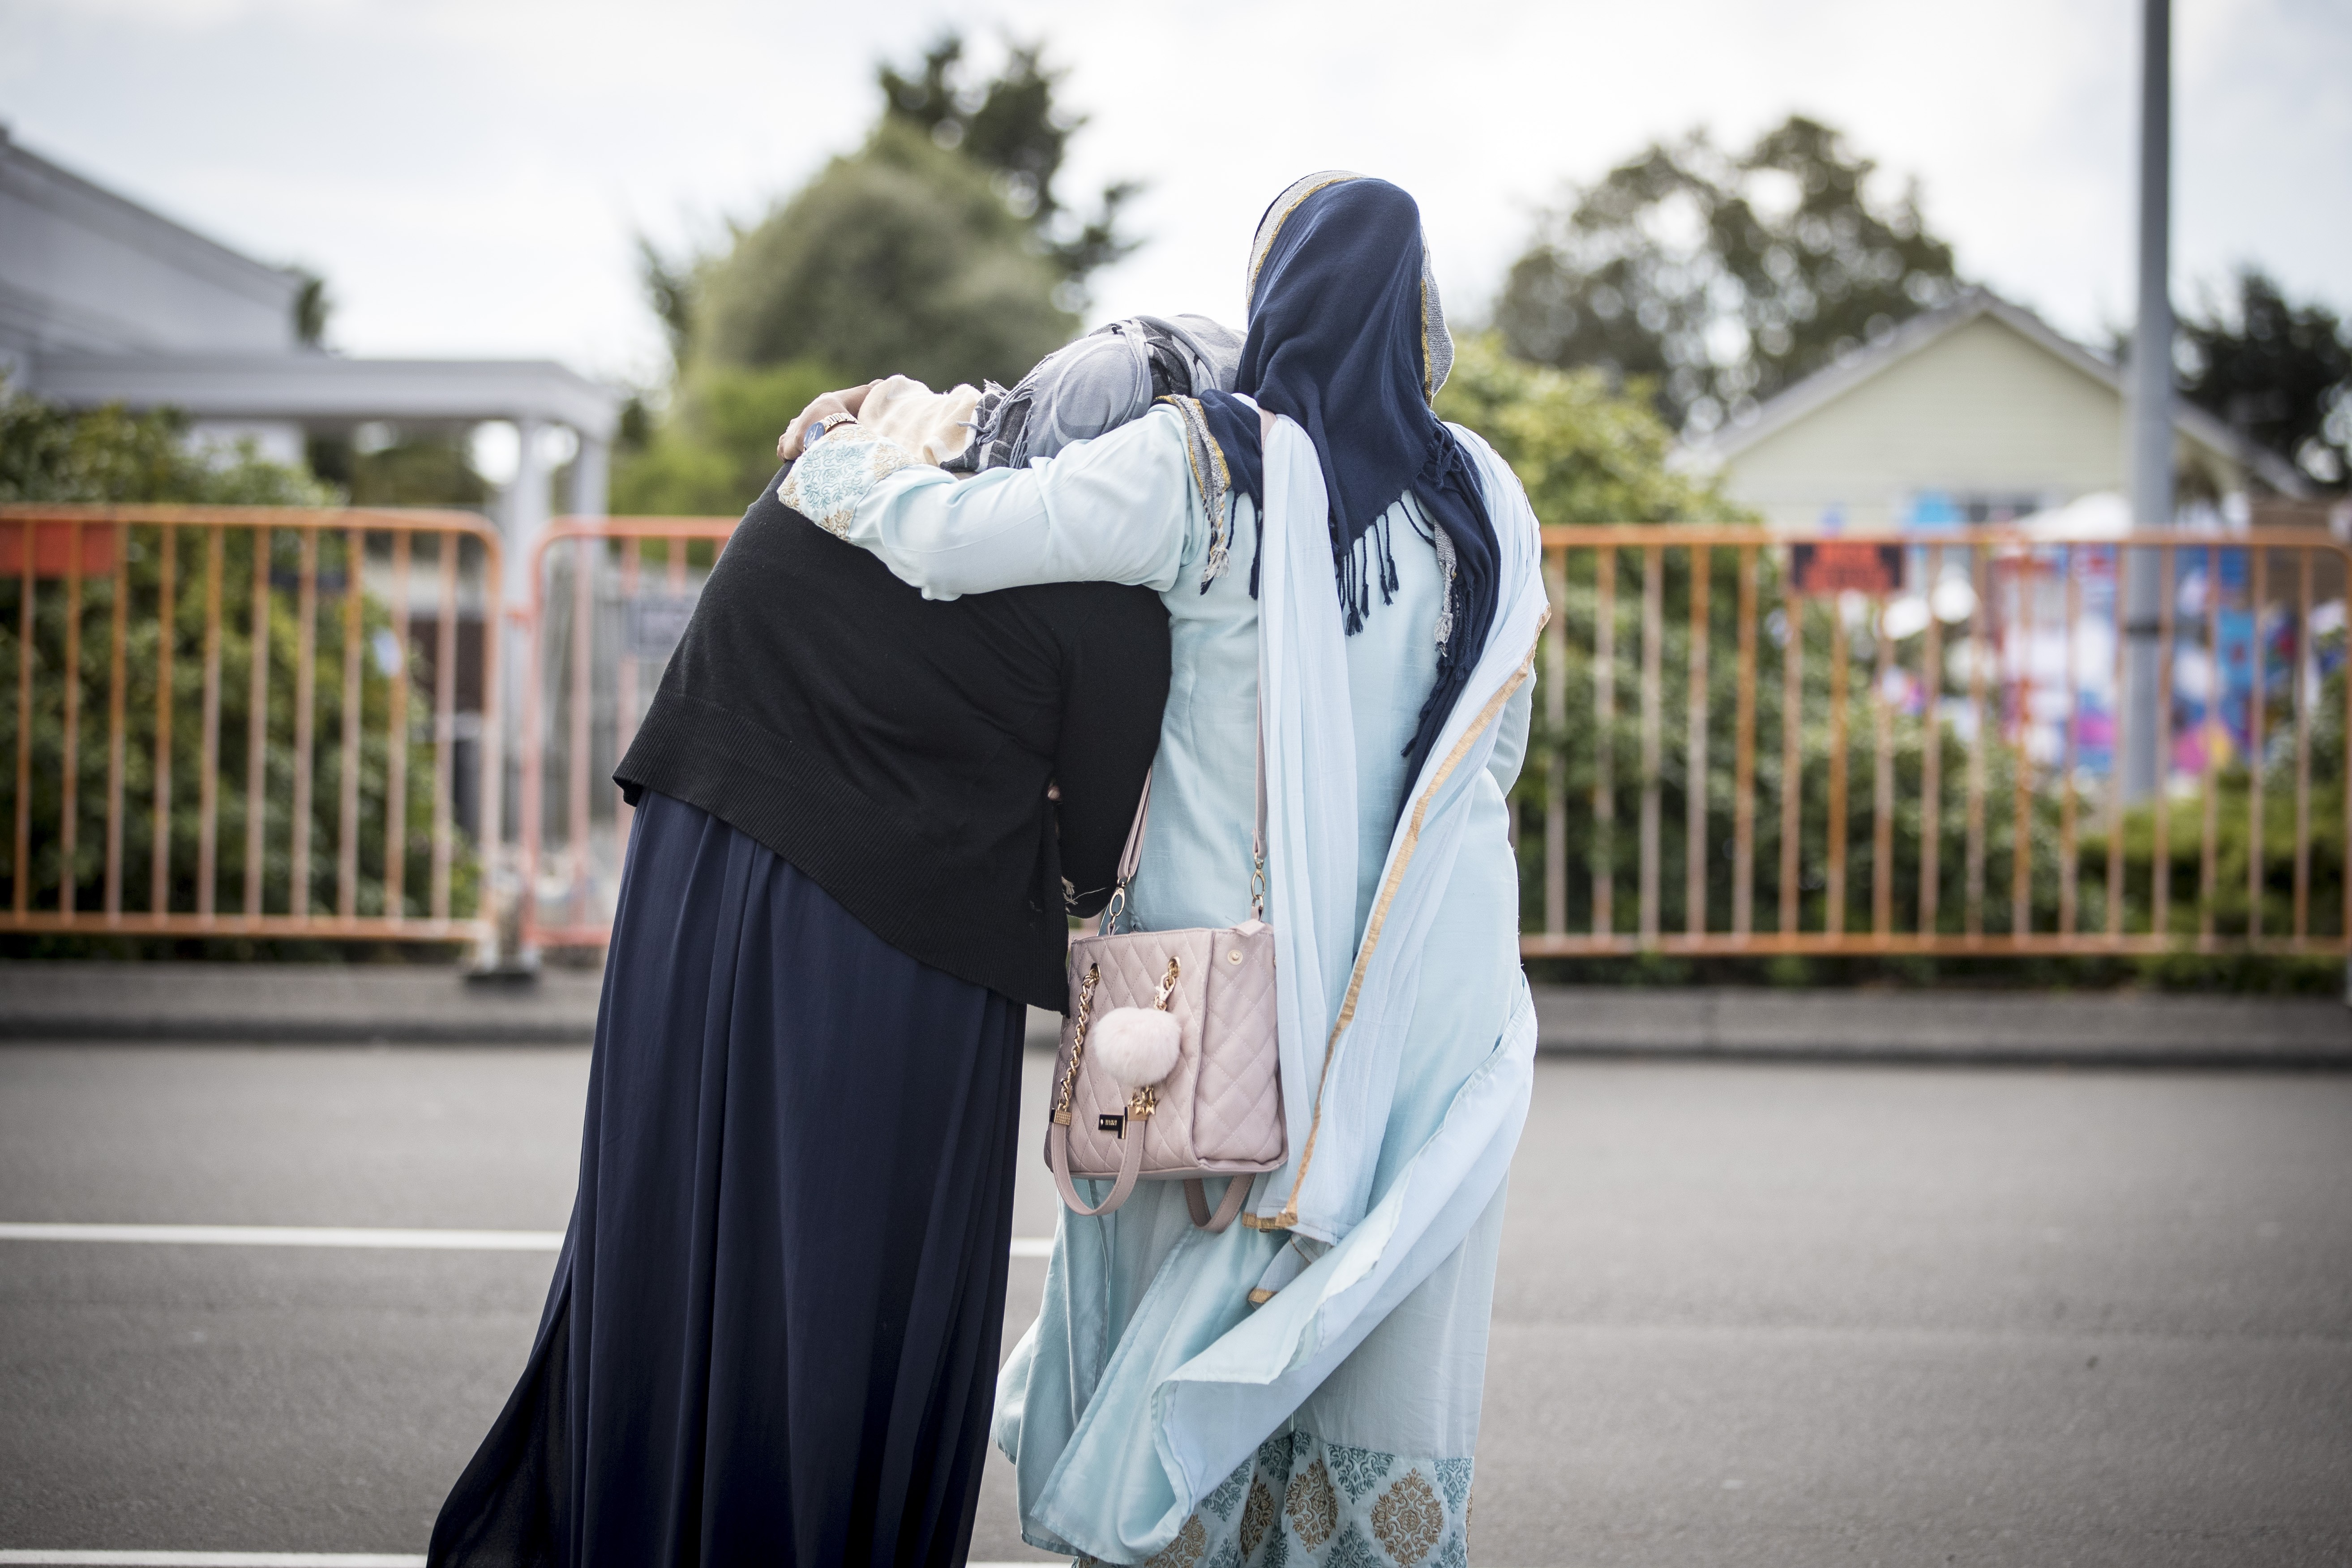 Two residents comfort each other in New Zealand on March 22, 2019. File photo: NZ Herald